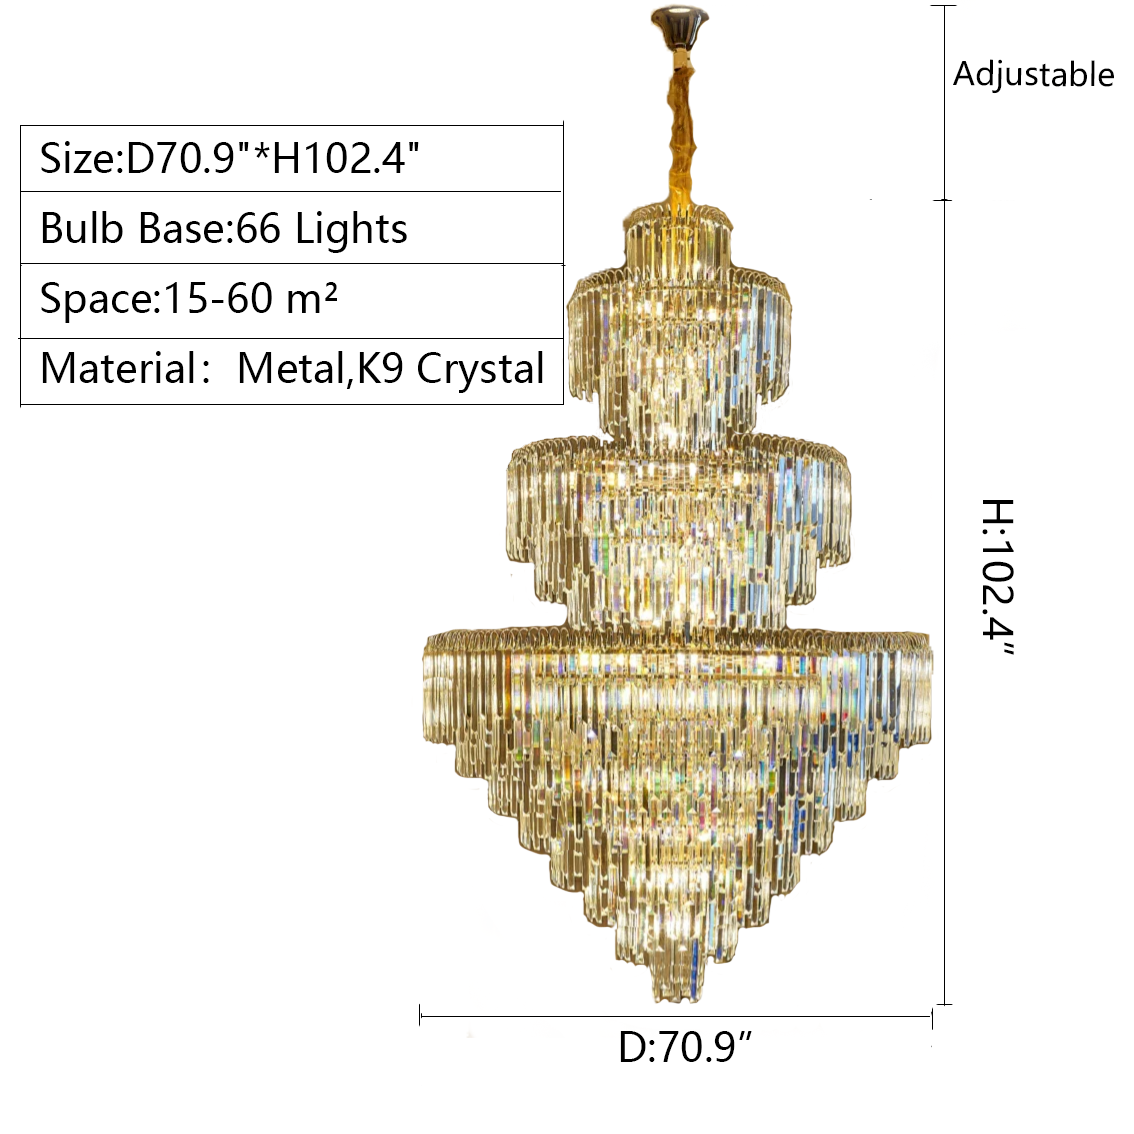 3 Layers Extra Large Living Room Chandelier Luxury Foyer Entryway Crystal Light Fixture Chandeliers Kevinstudiolives D70.9"*H102.4"/ 66 Lights Warm Light 